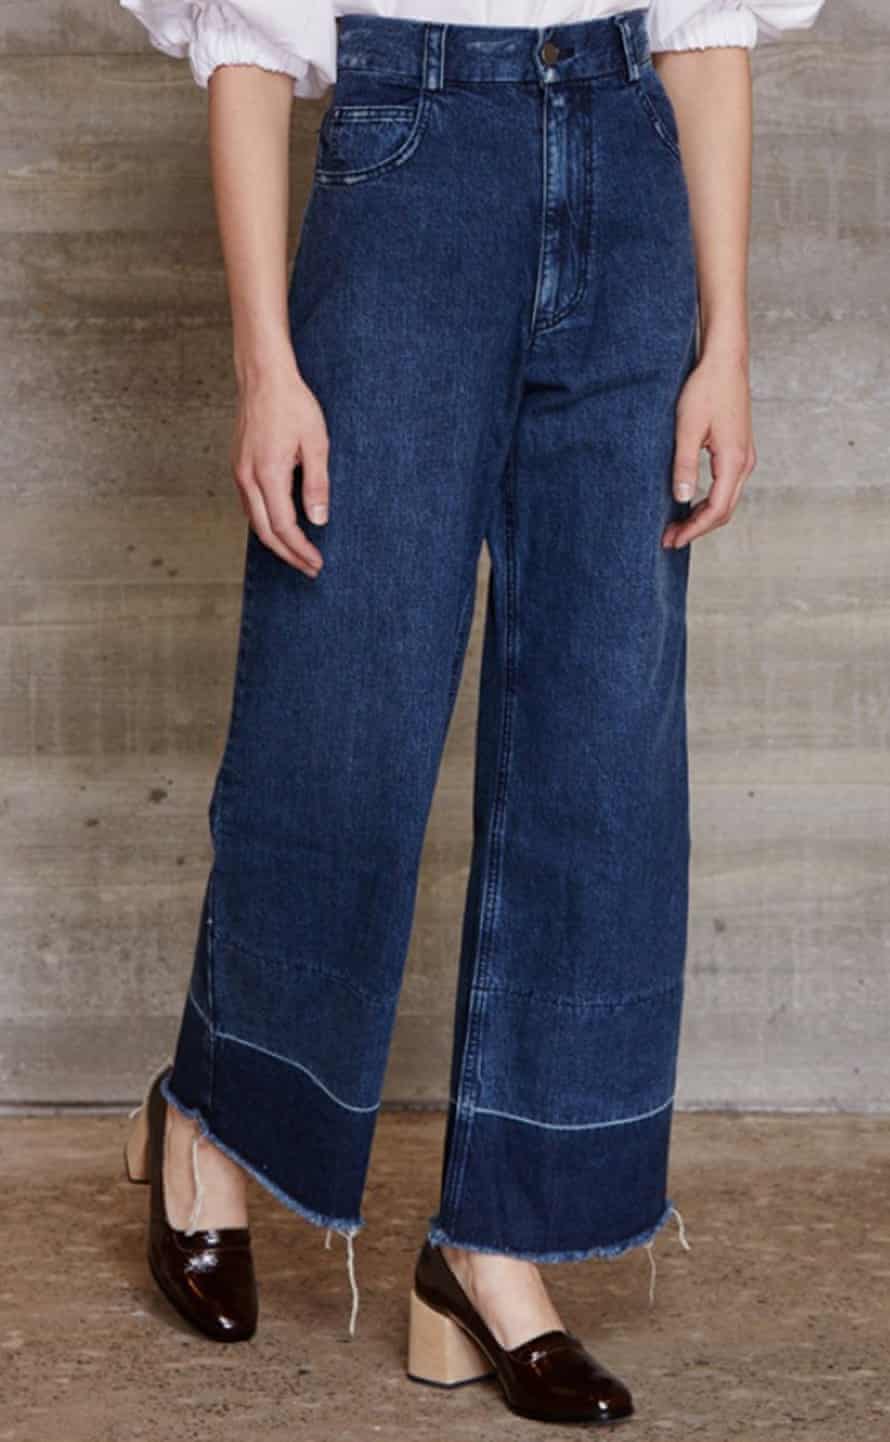 Into the fray: jeans and the no-hem-hemline | Fashion | The Guardian